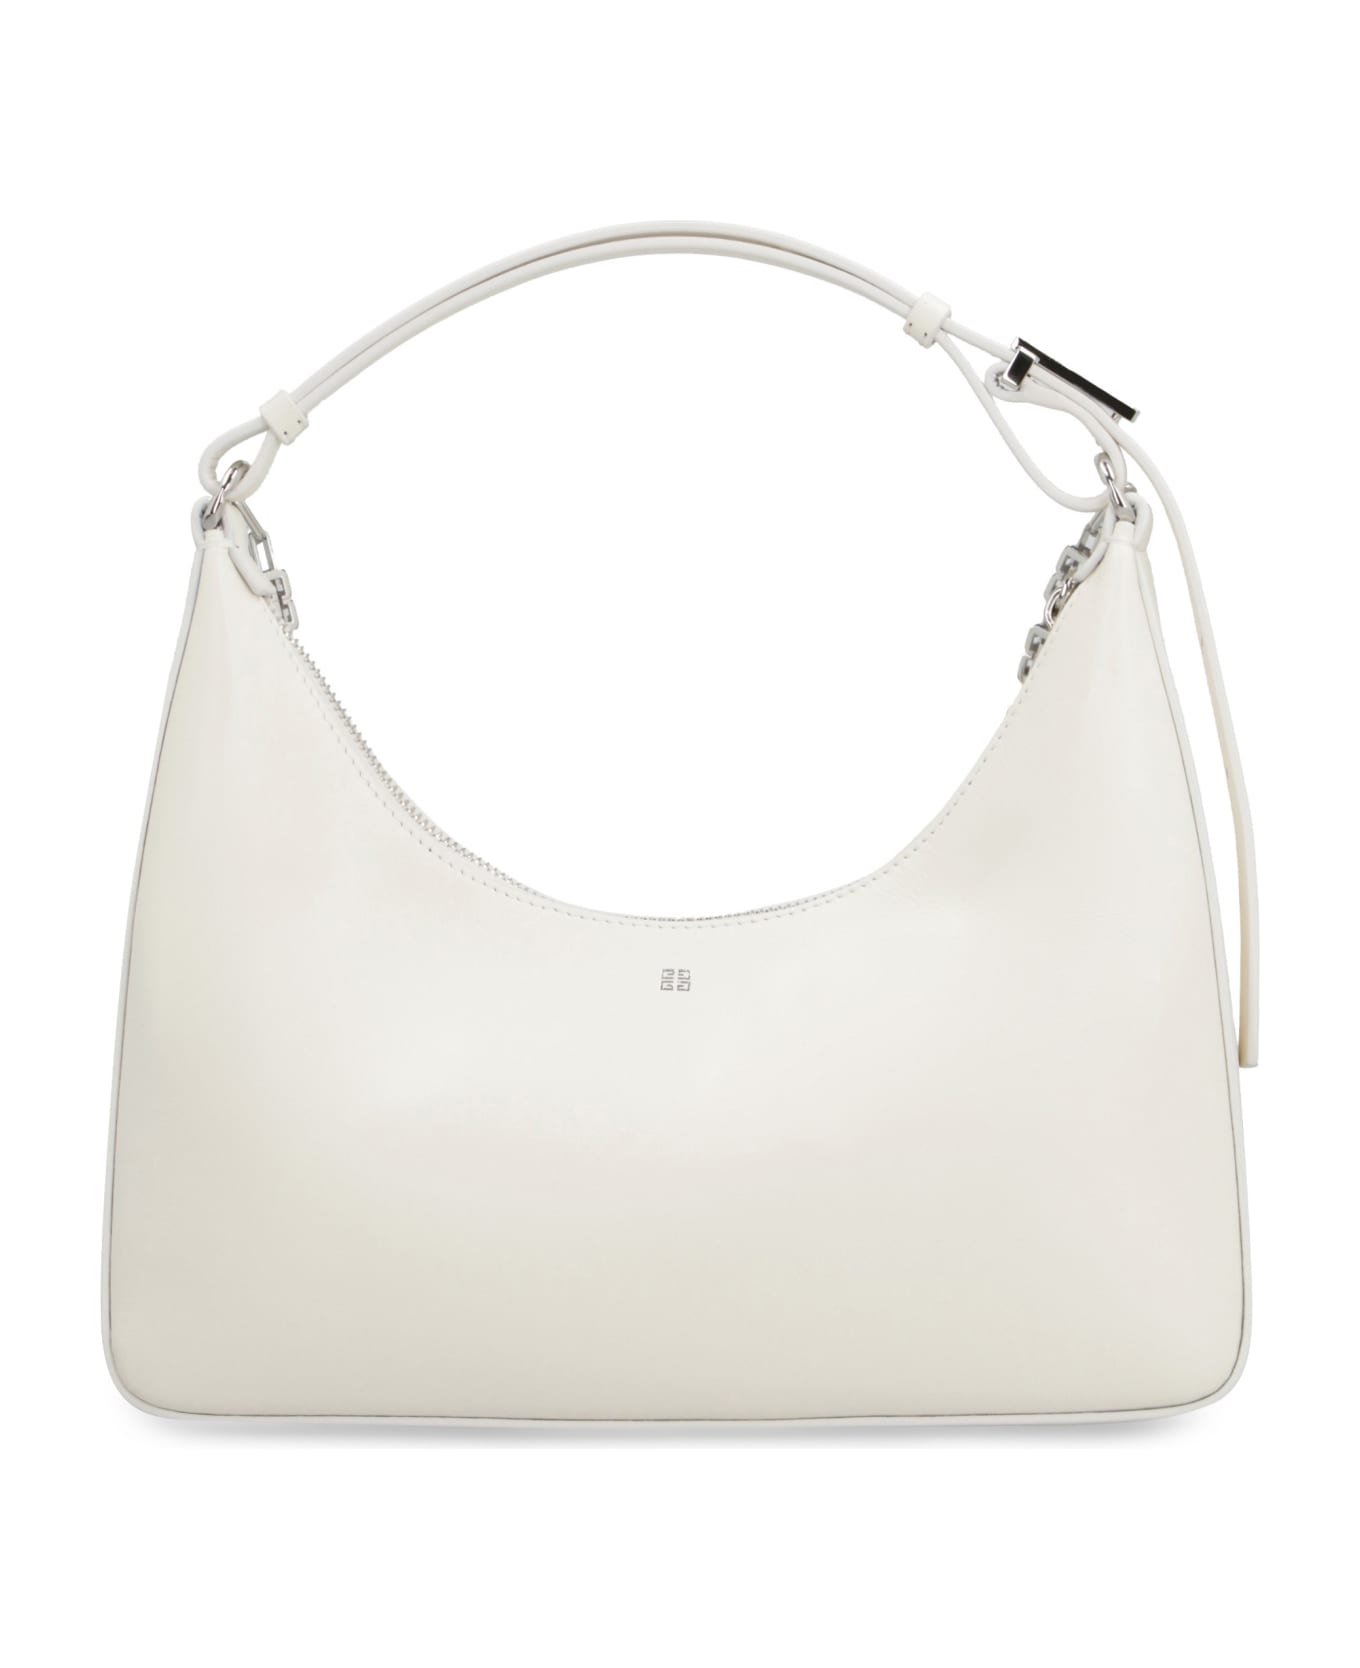 Givenchy Moon Cut Out Leather Shoulder Bag - White